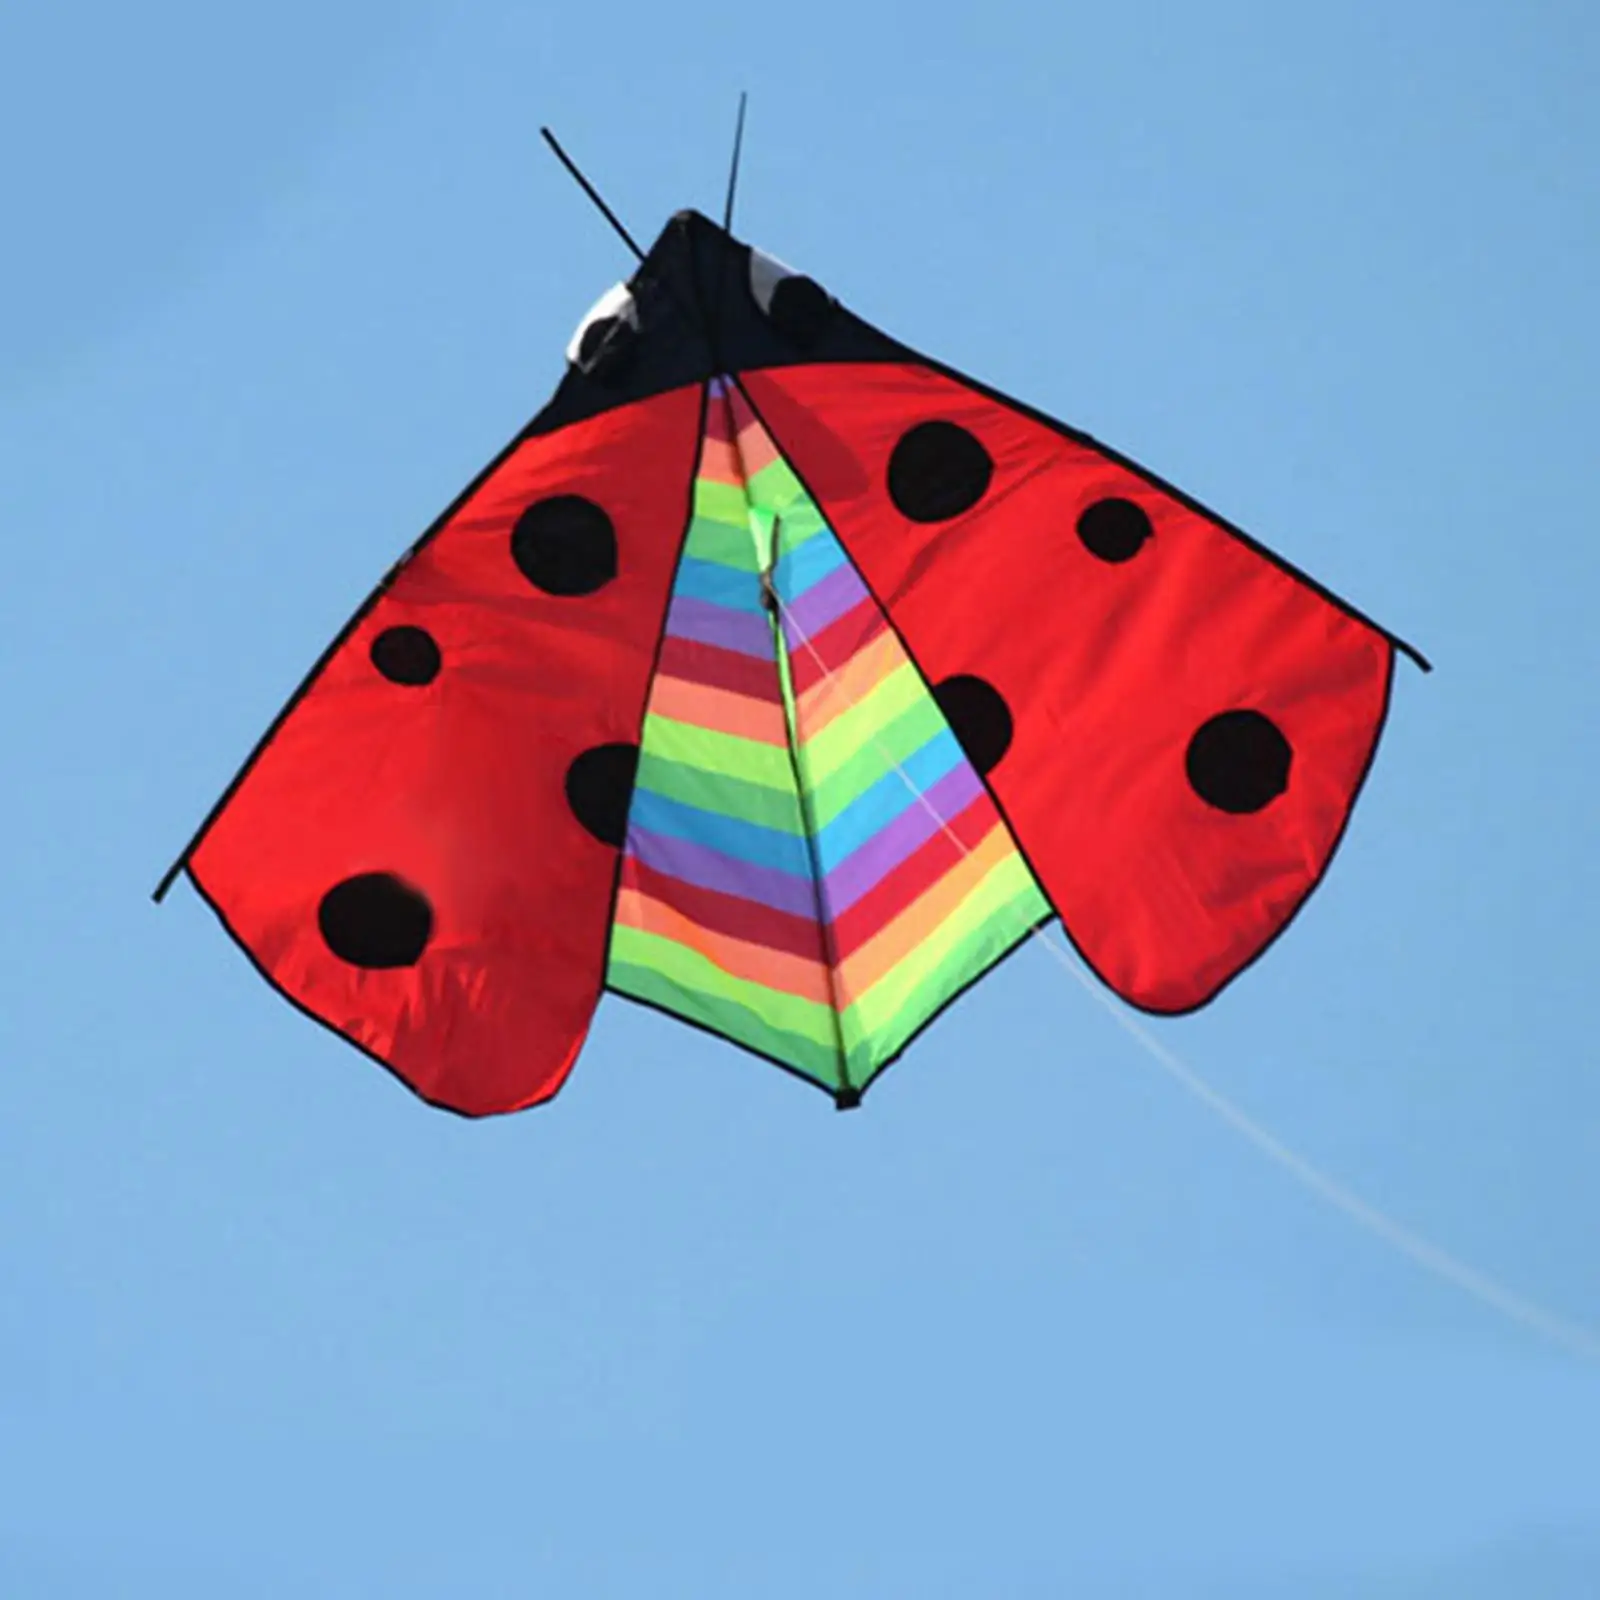 Vivid Delta Kite Fly Kite Single Line Fun Toy Easy to Fly Huge Wingspan Windsock Giant Triangle Ladybug Kite for Garden Sports